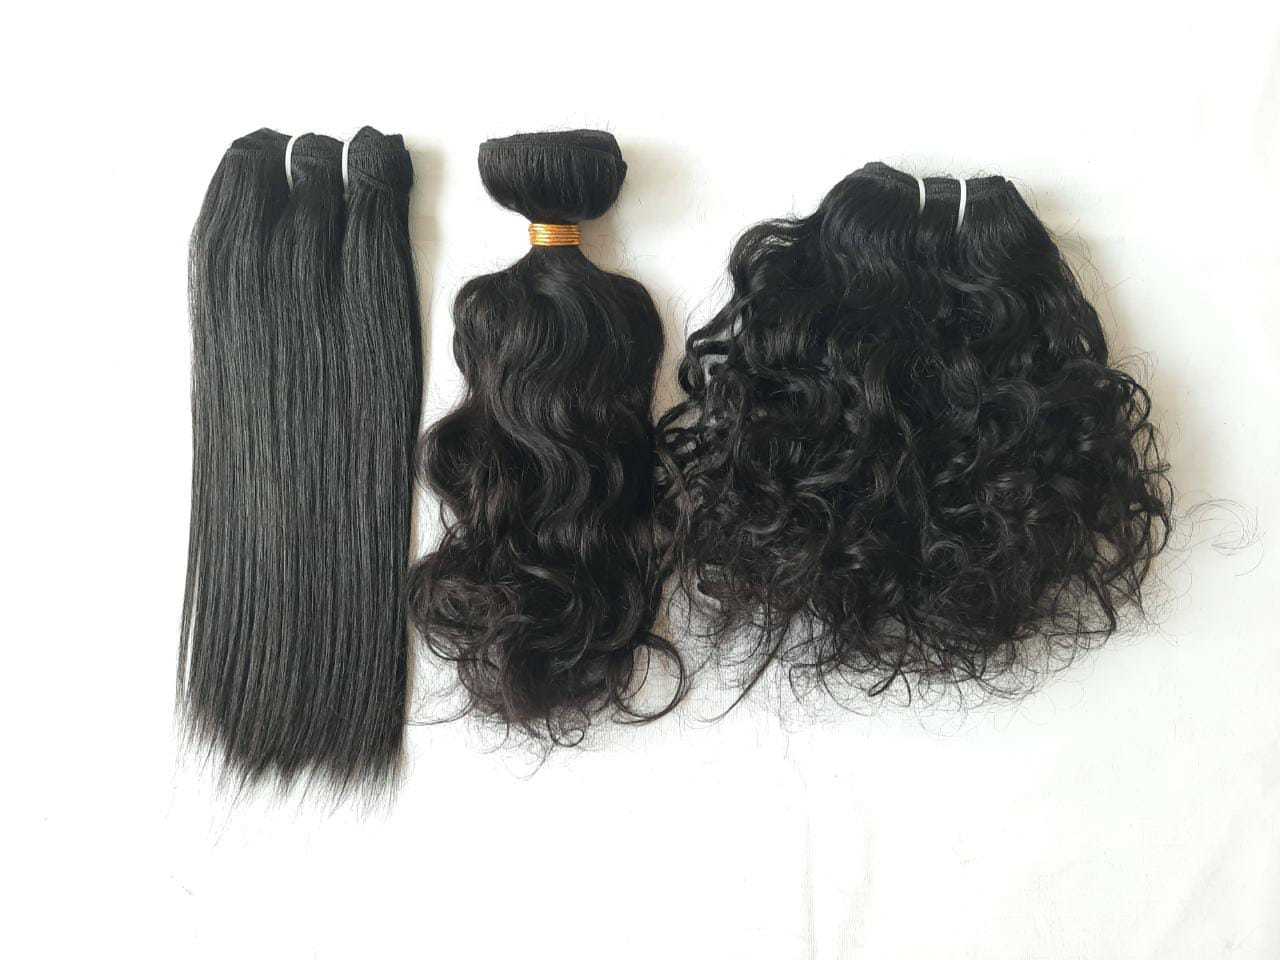 Double Machine Weft Extension Human Hair